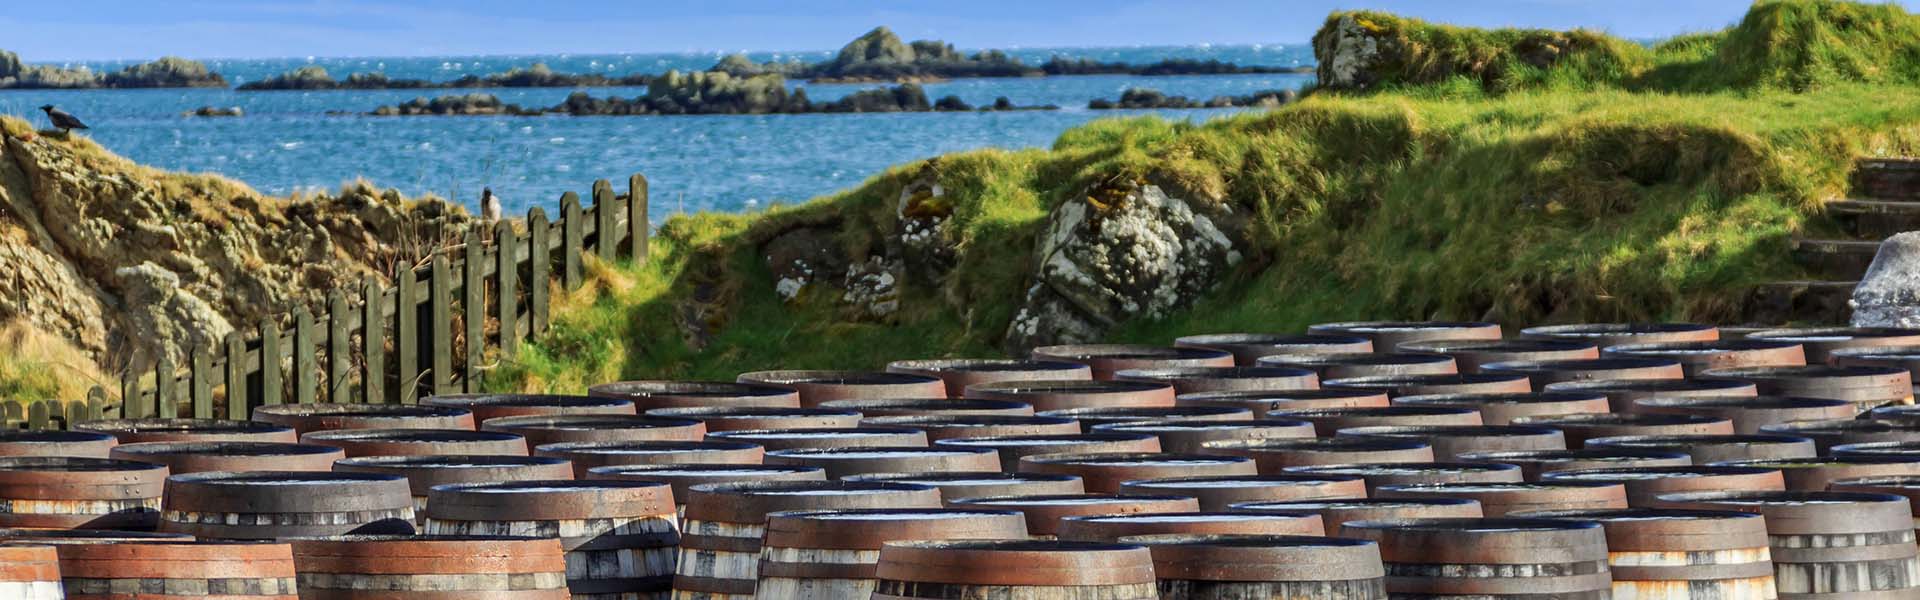 whisky barrels lined up by the water on Islay